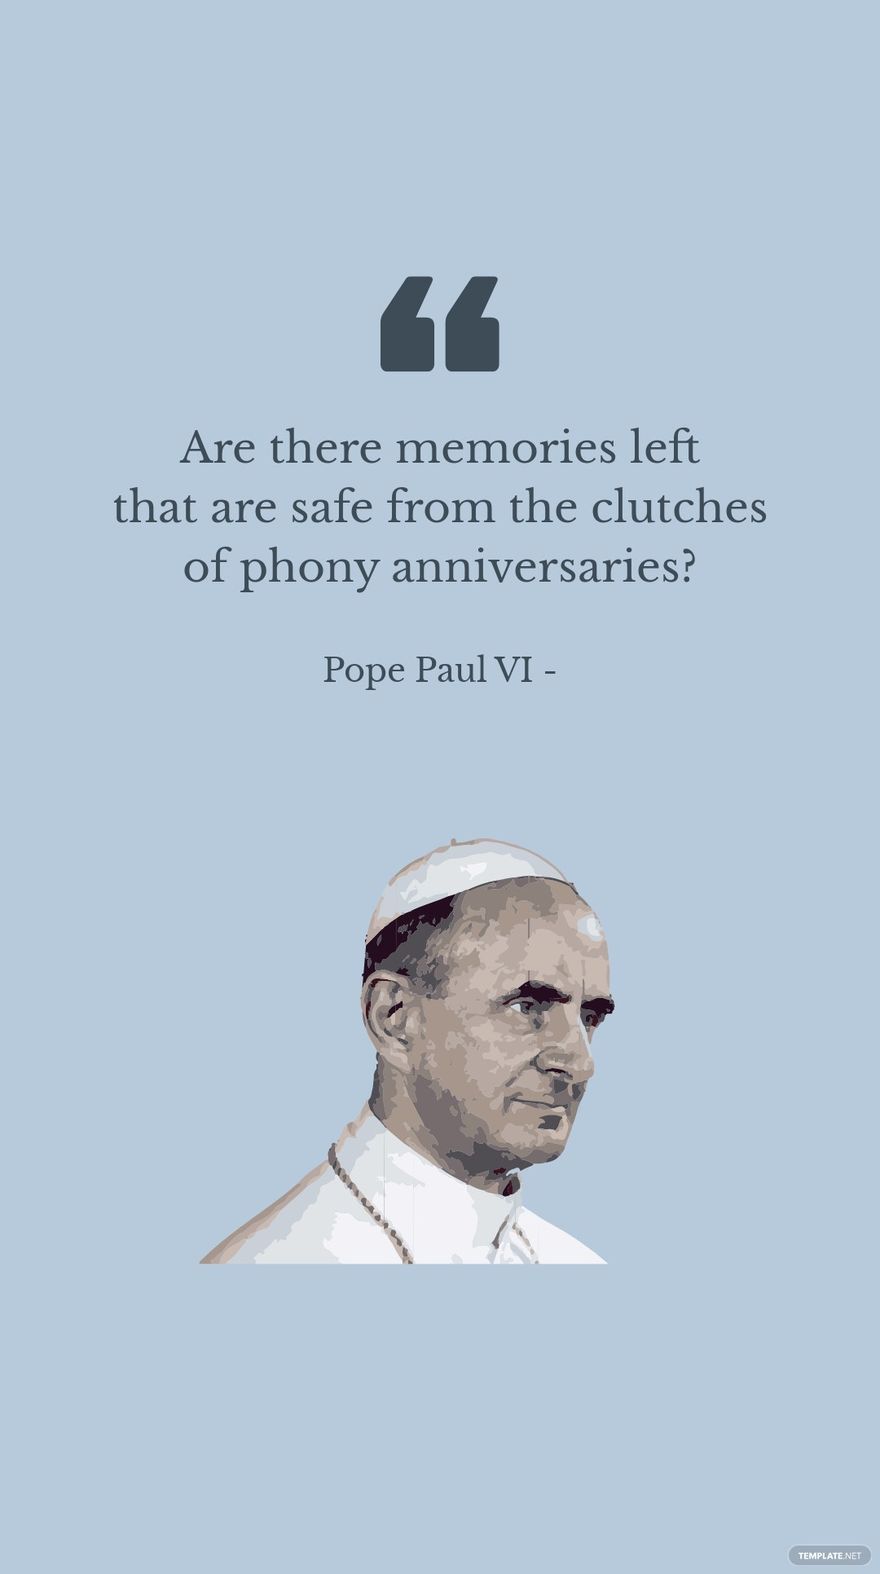 Pope Paul VI - Are there memories left that are safe from the clutches of phony anniversaries?